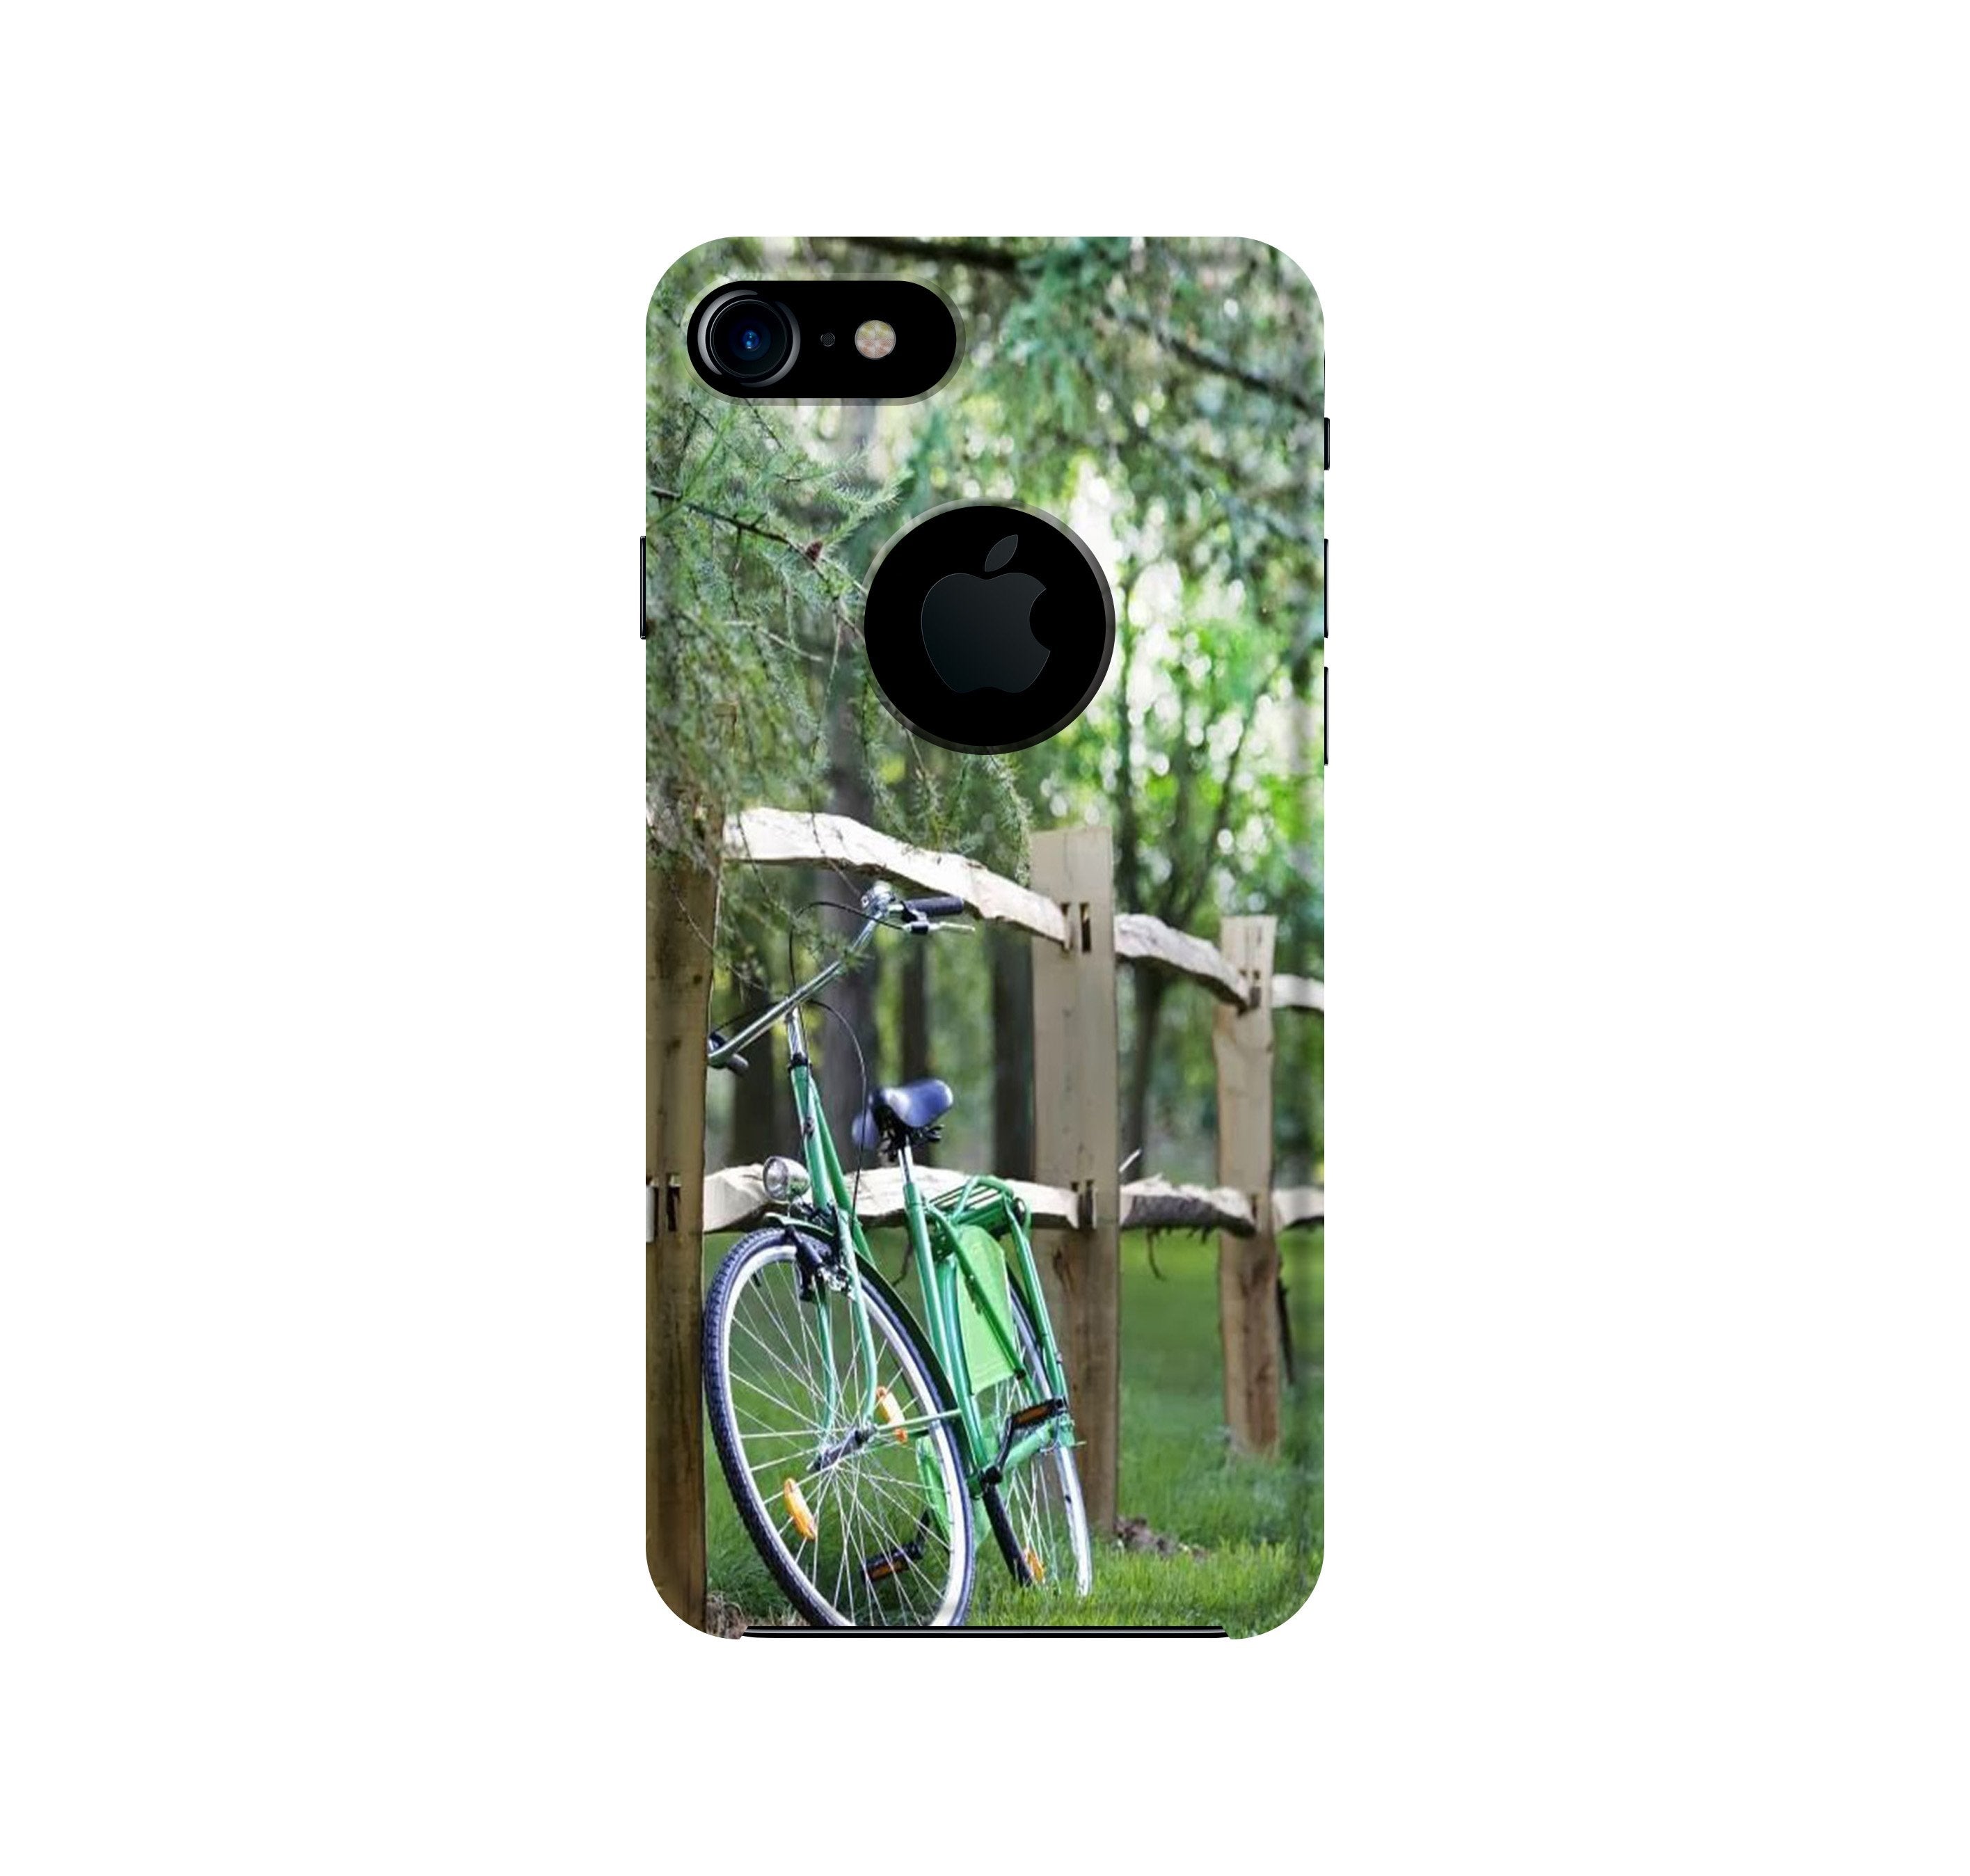 Bicycle Case for iPhone 7 logo cut (Design No. 208)